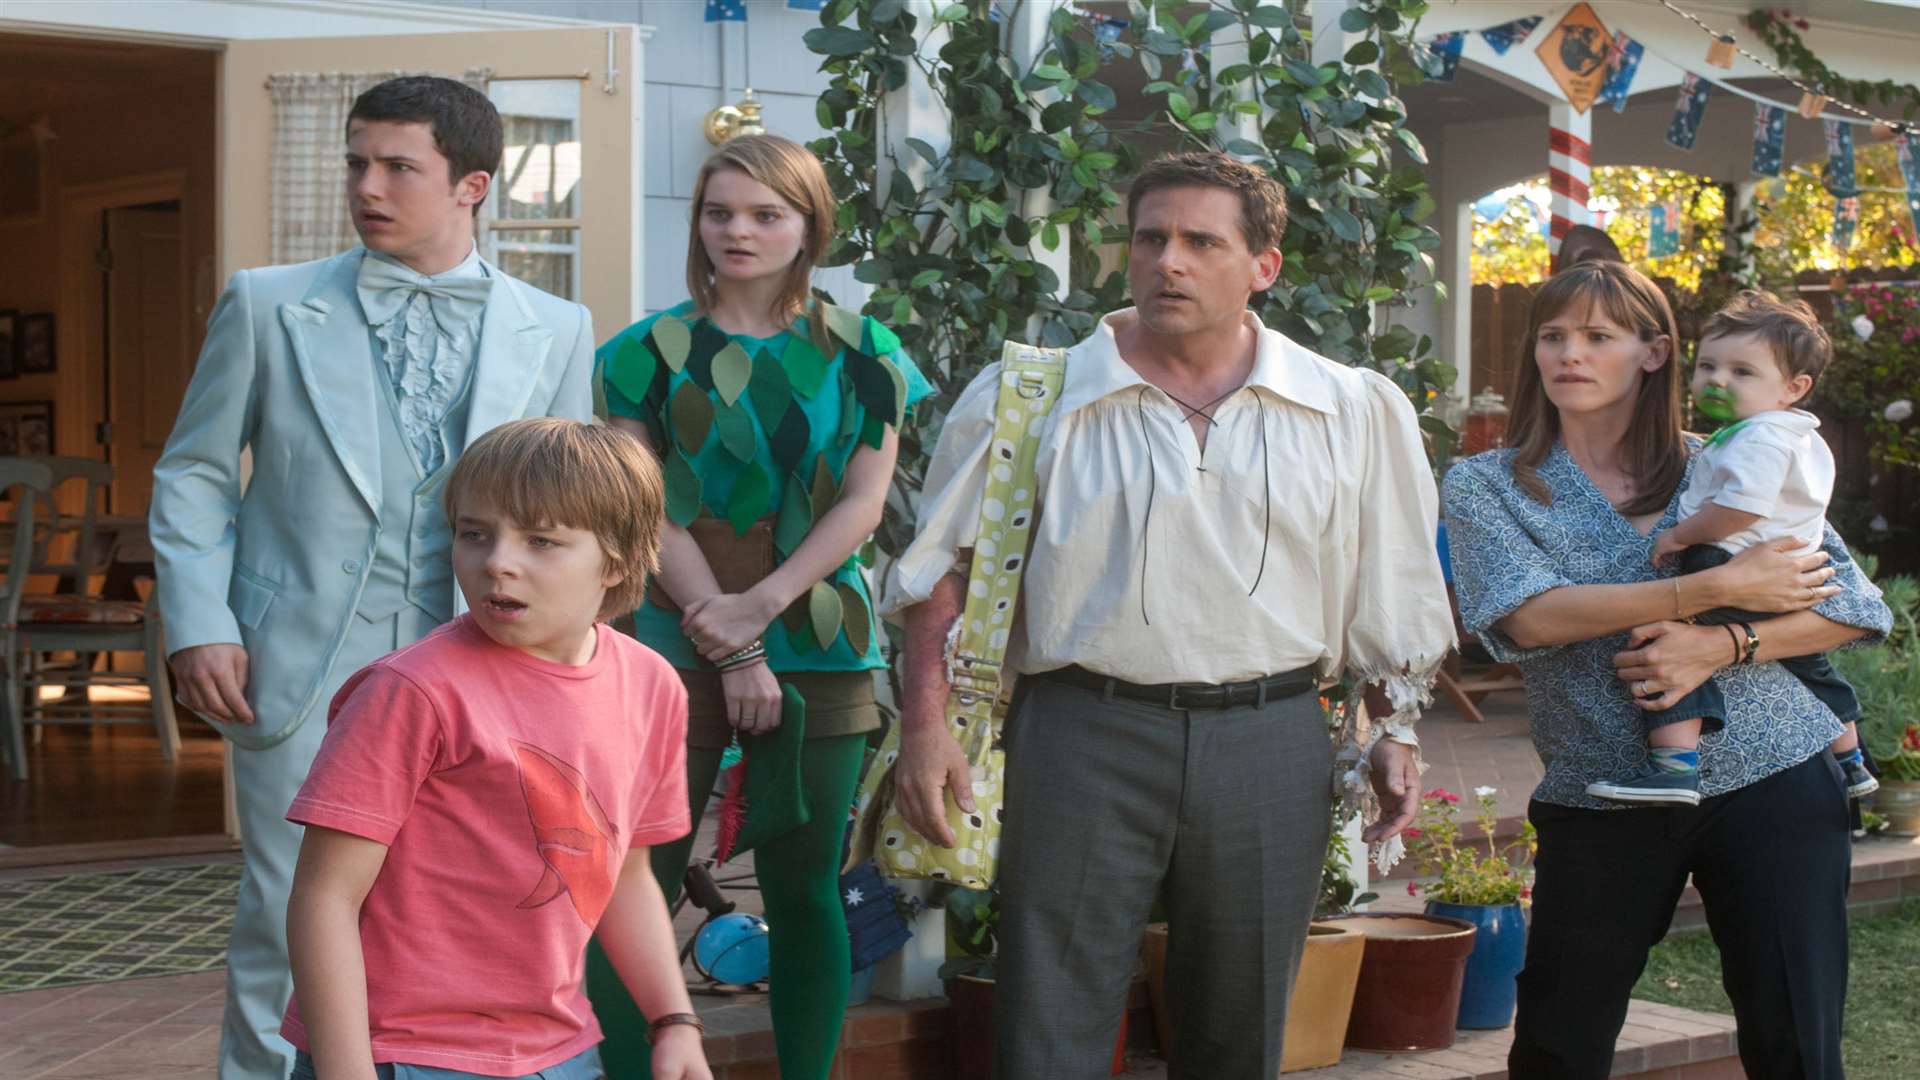 Alexander & The Terrible, Horrible, No Good, Very Bad Day, with Dylan Minnette, Ed Oxenbould, Kerris Dorsey, Steve Carell, Jennifer Garner & Zoey/Elise Vargas. Picture: PA Photo/Disney